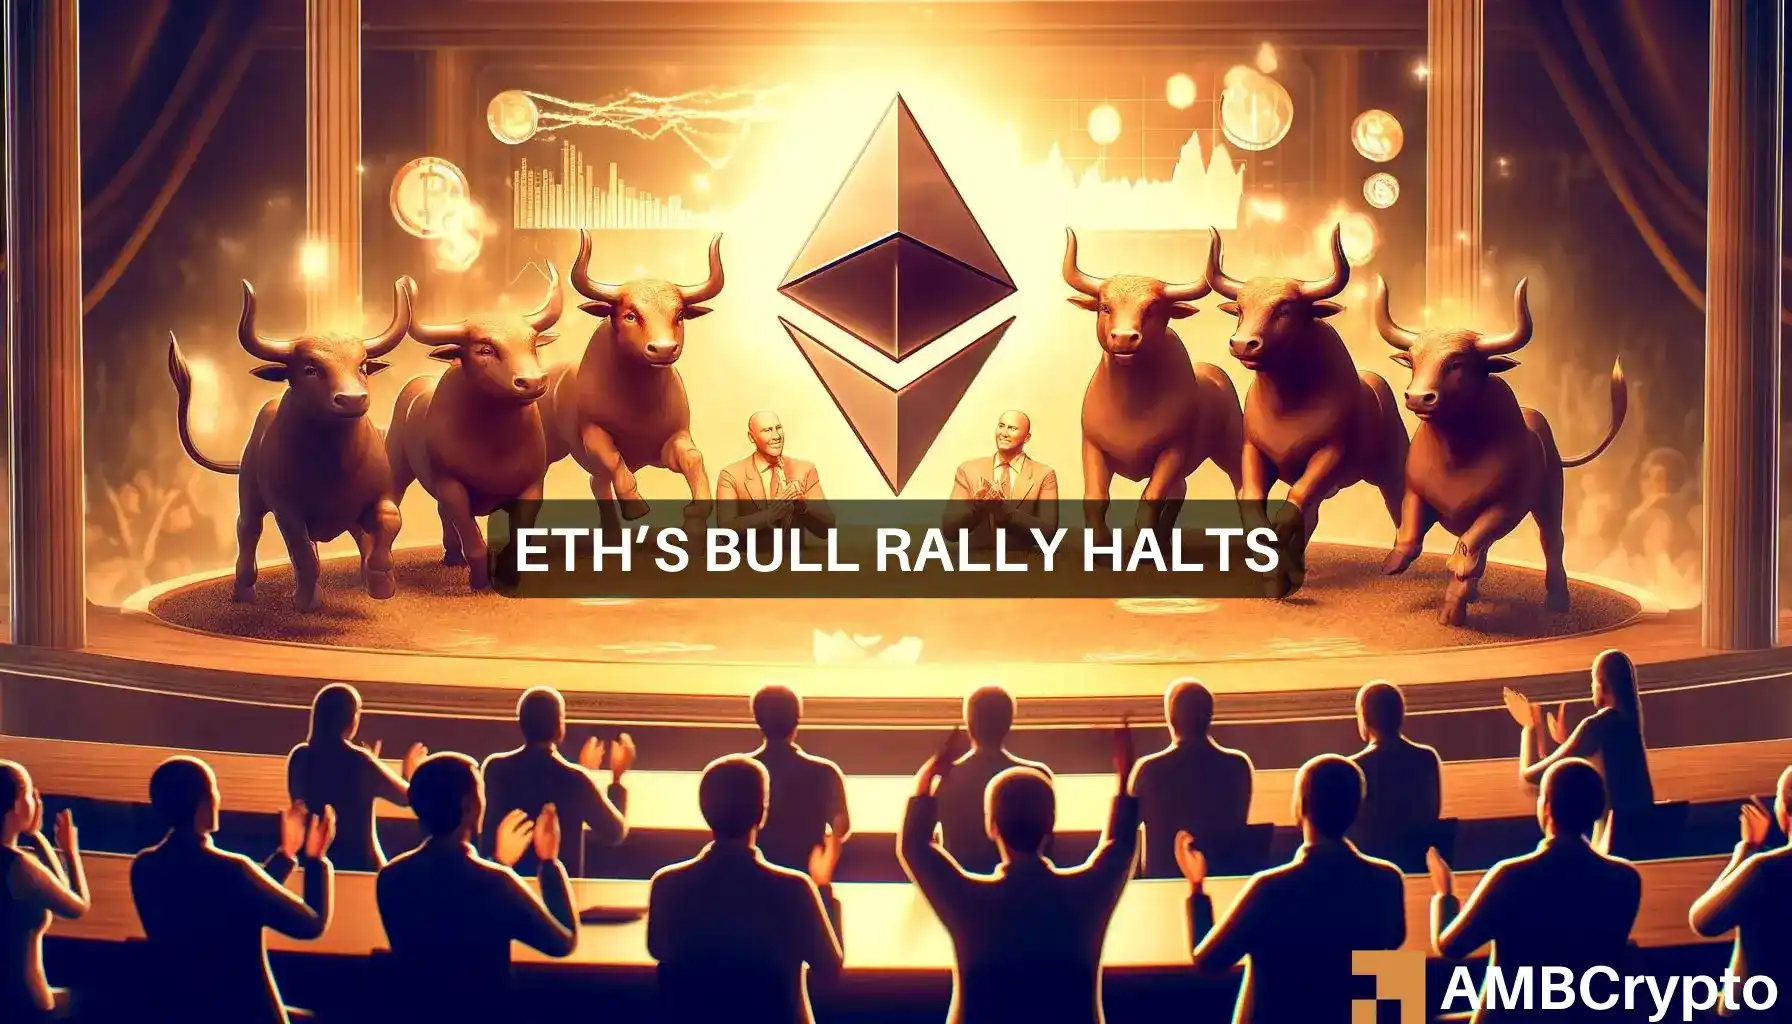 Ethereum clears THIS key hurdle: What’s next for ETH’s price?